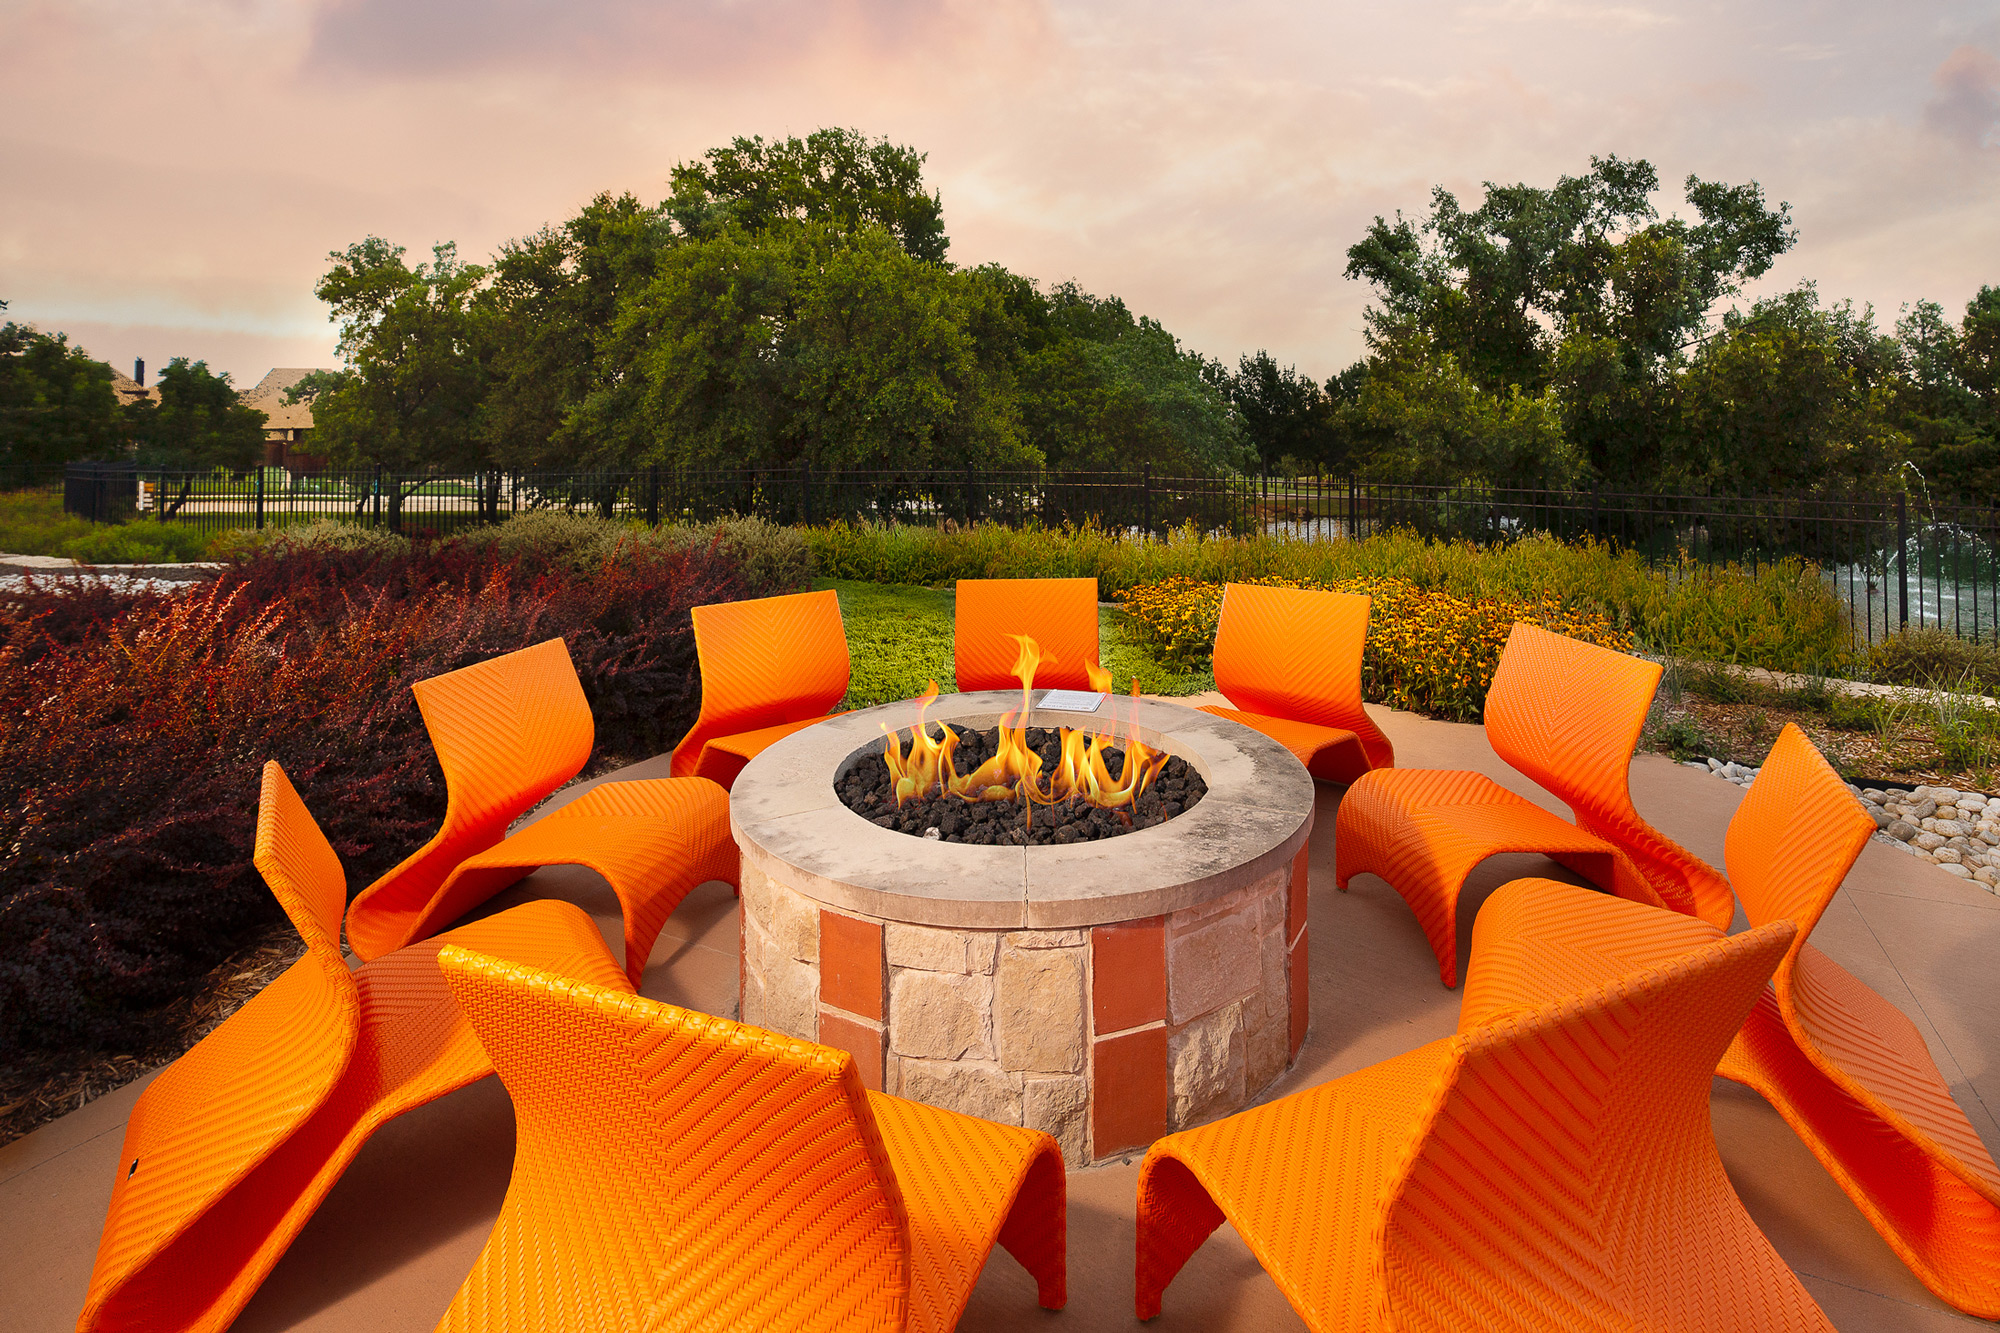 Get cozy around the community's fire pit at The Haven.